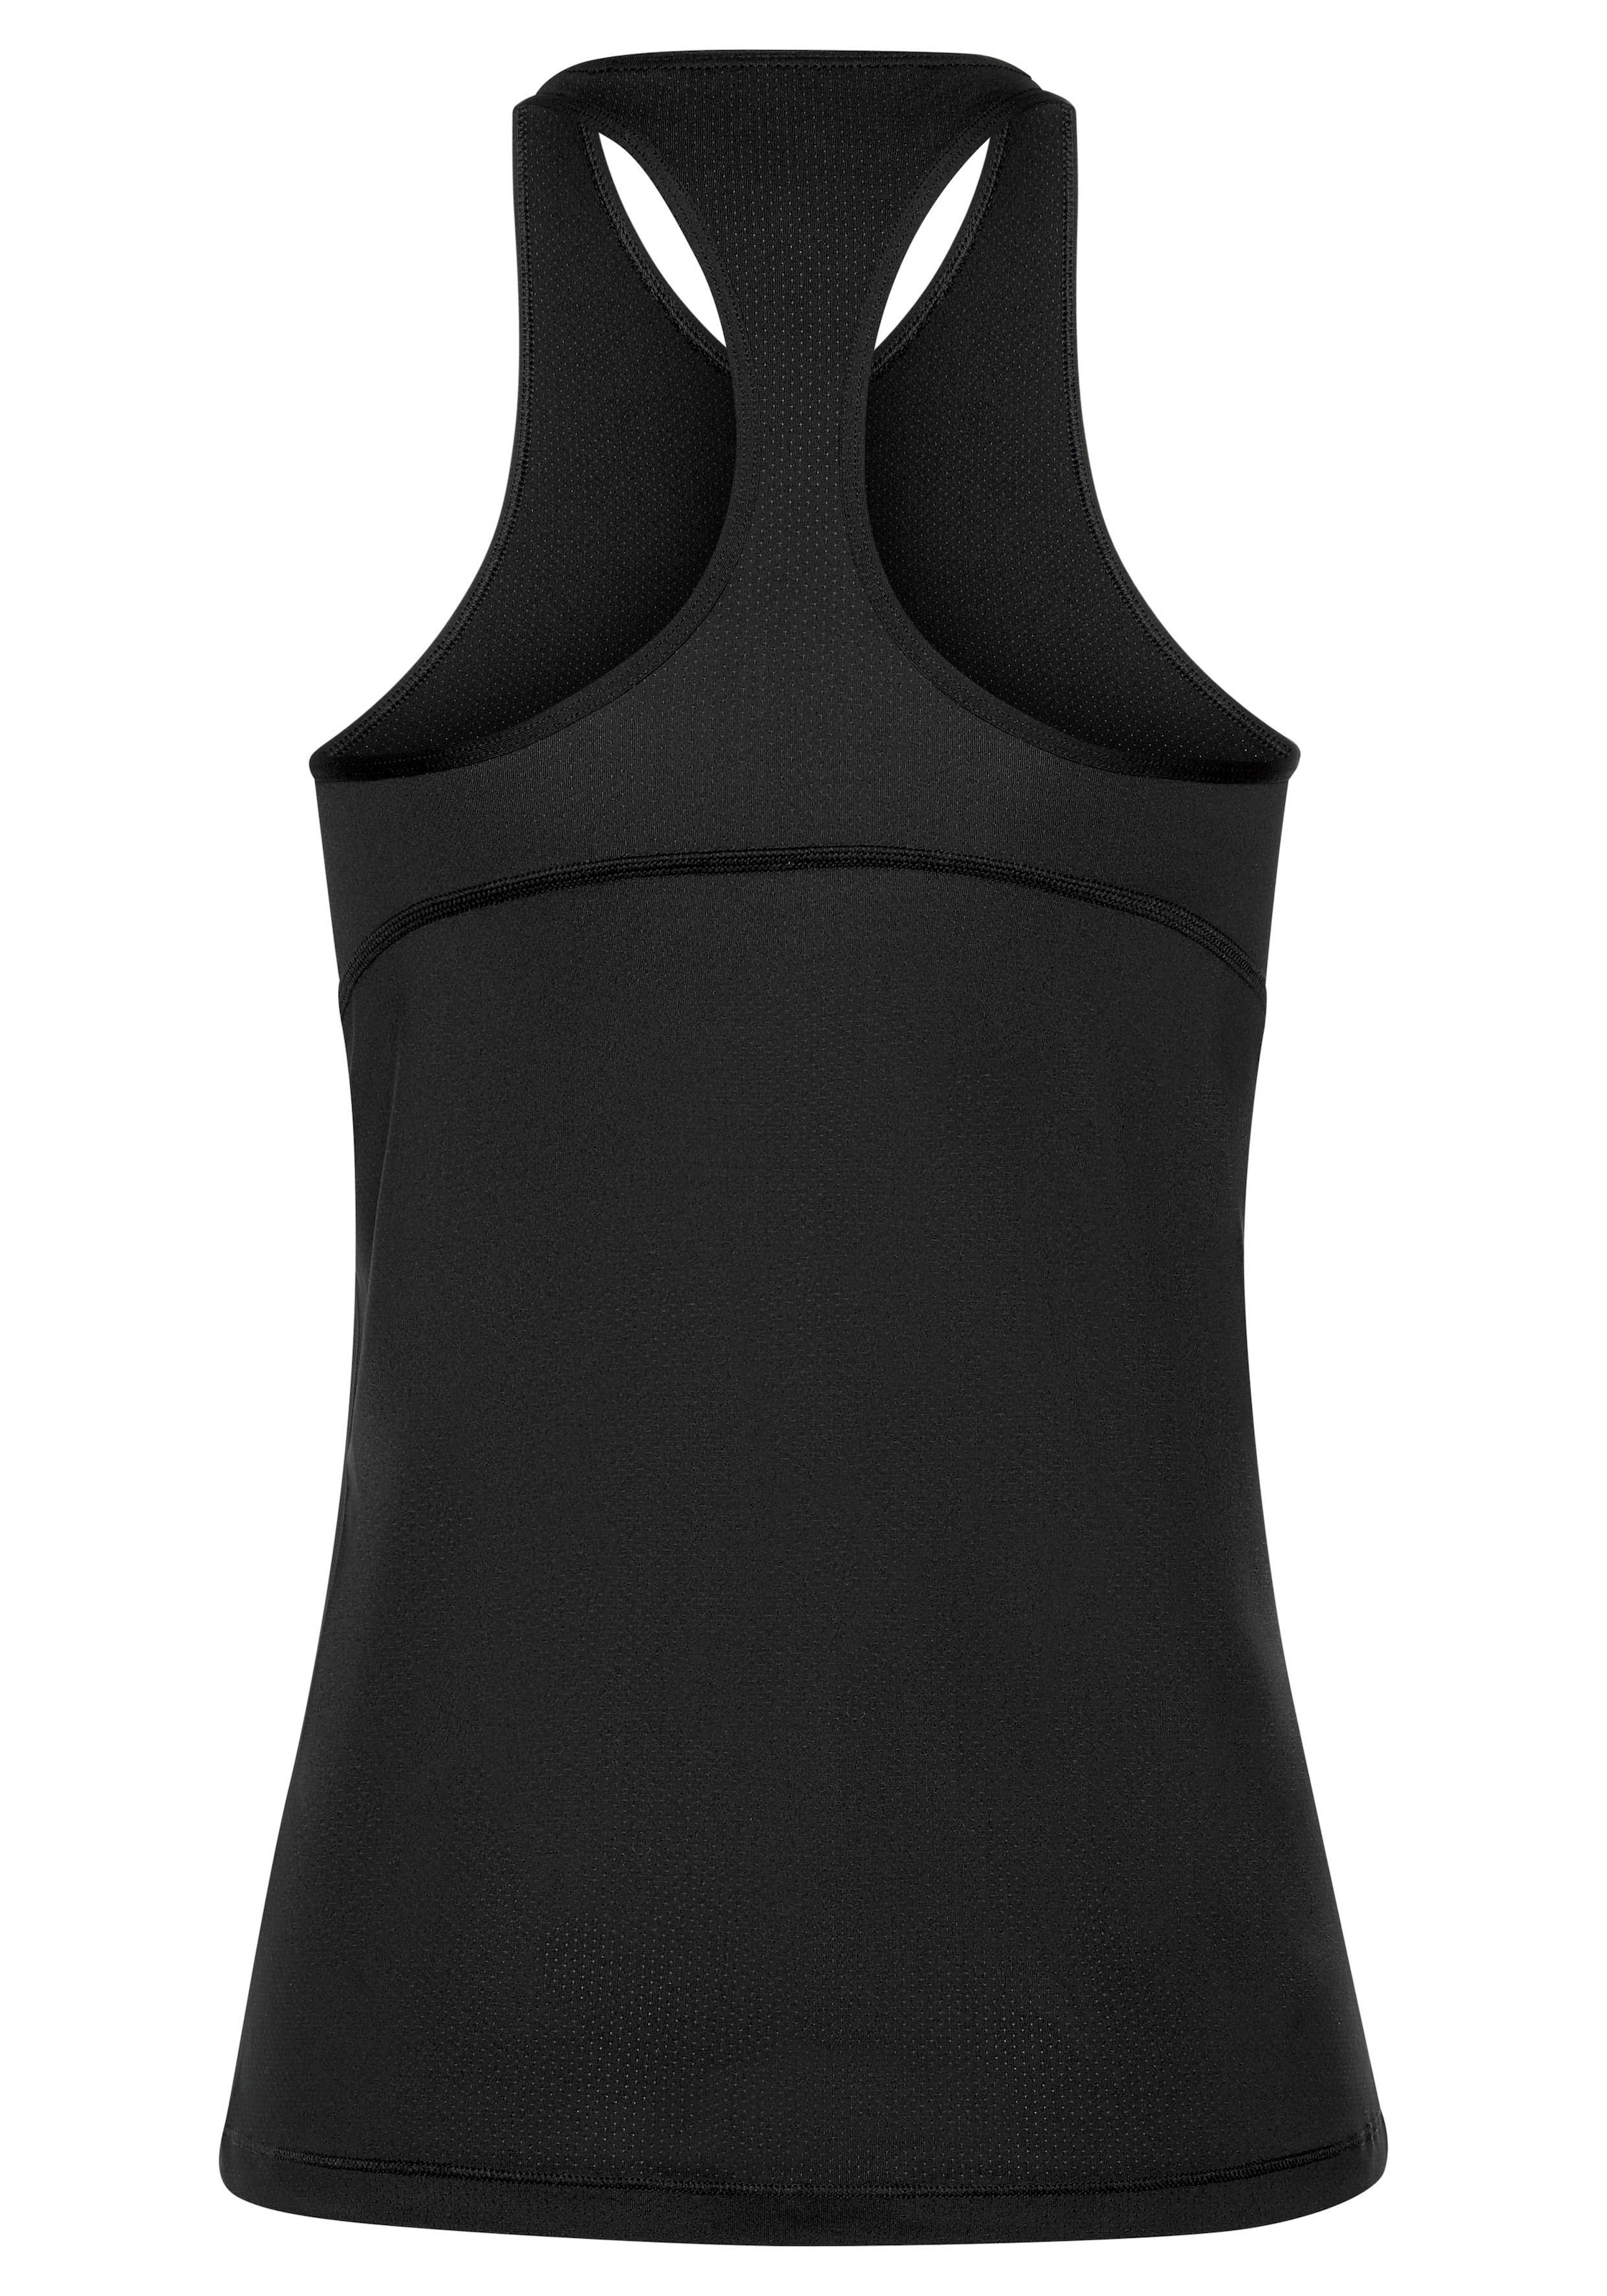 NP »WOMAN ALL MESH« OVER Nike TANK online Funktionstop